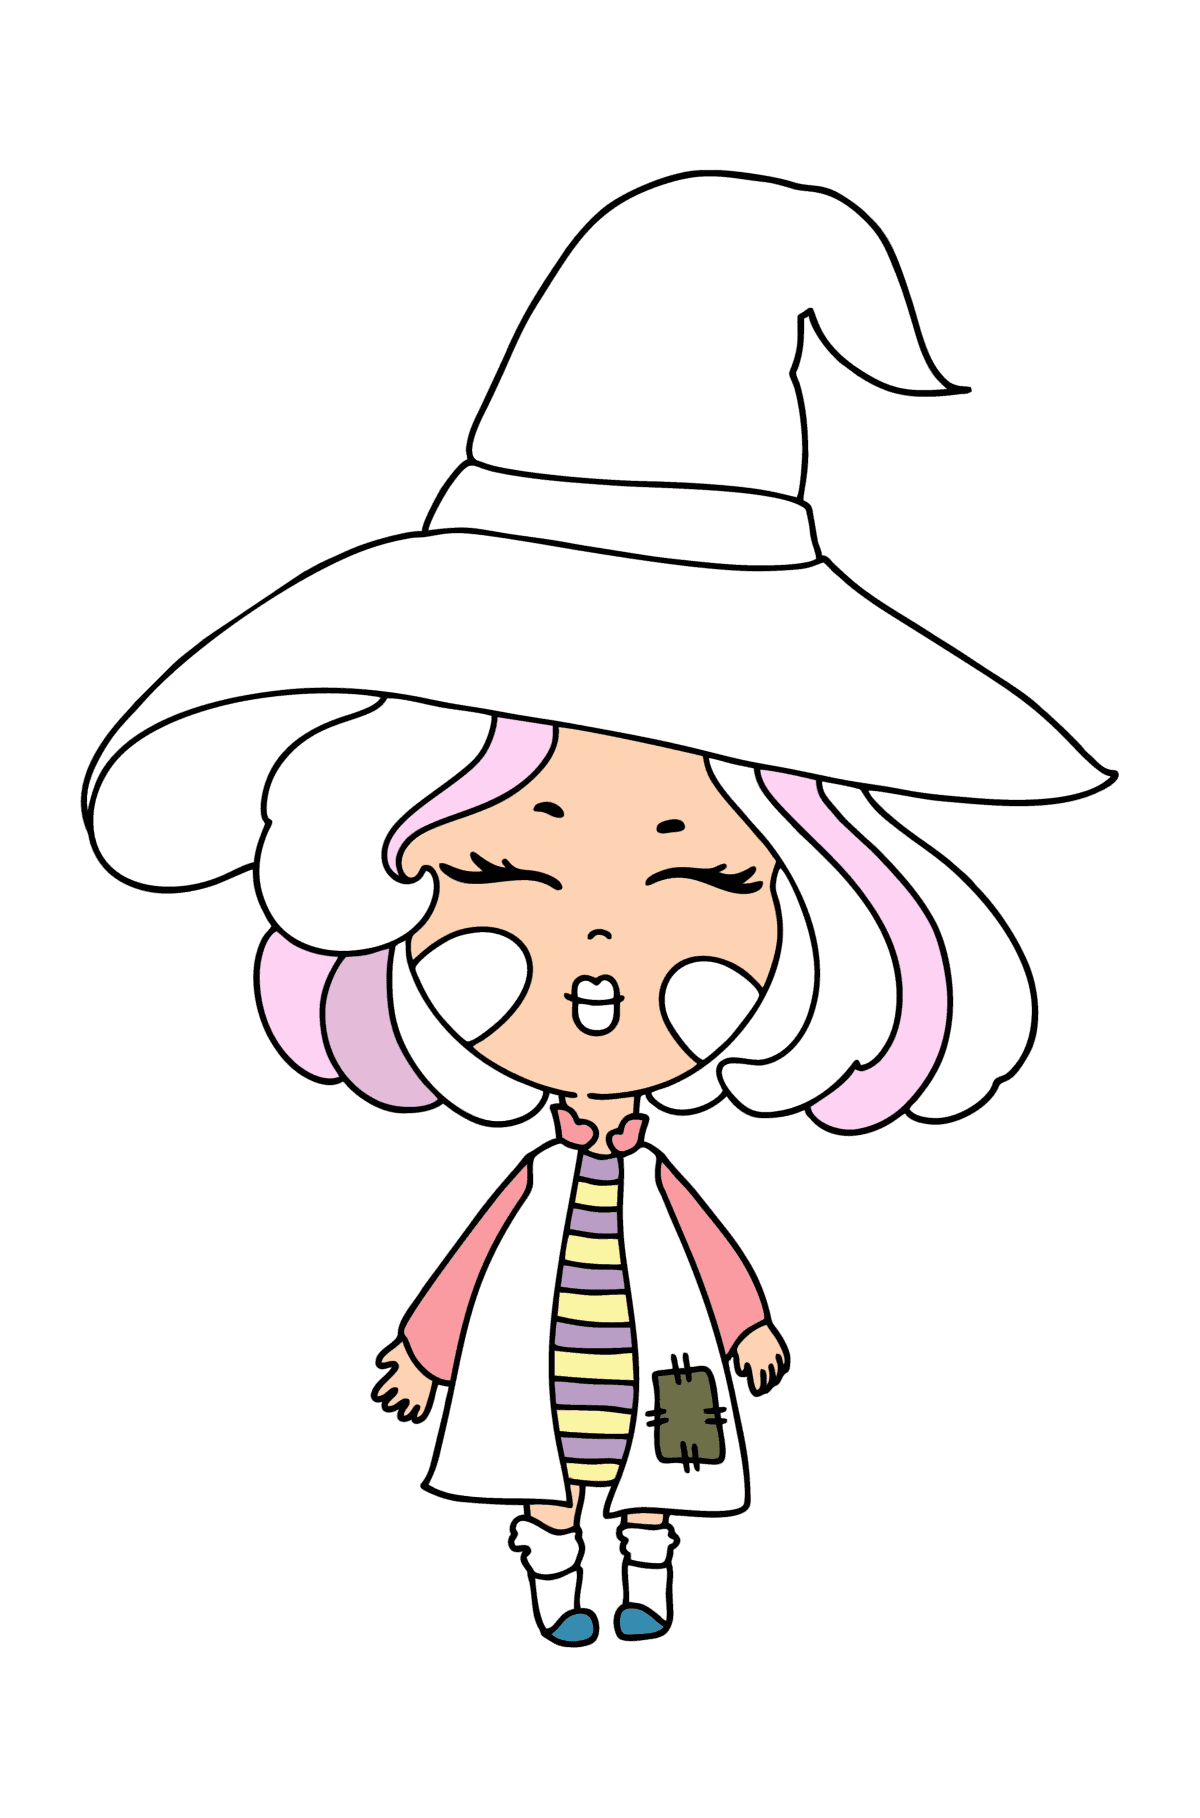 Girl in a witch costume сoloring page - Coloring Pages for Kids